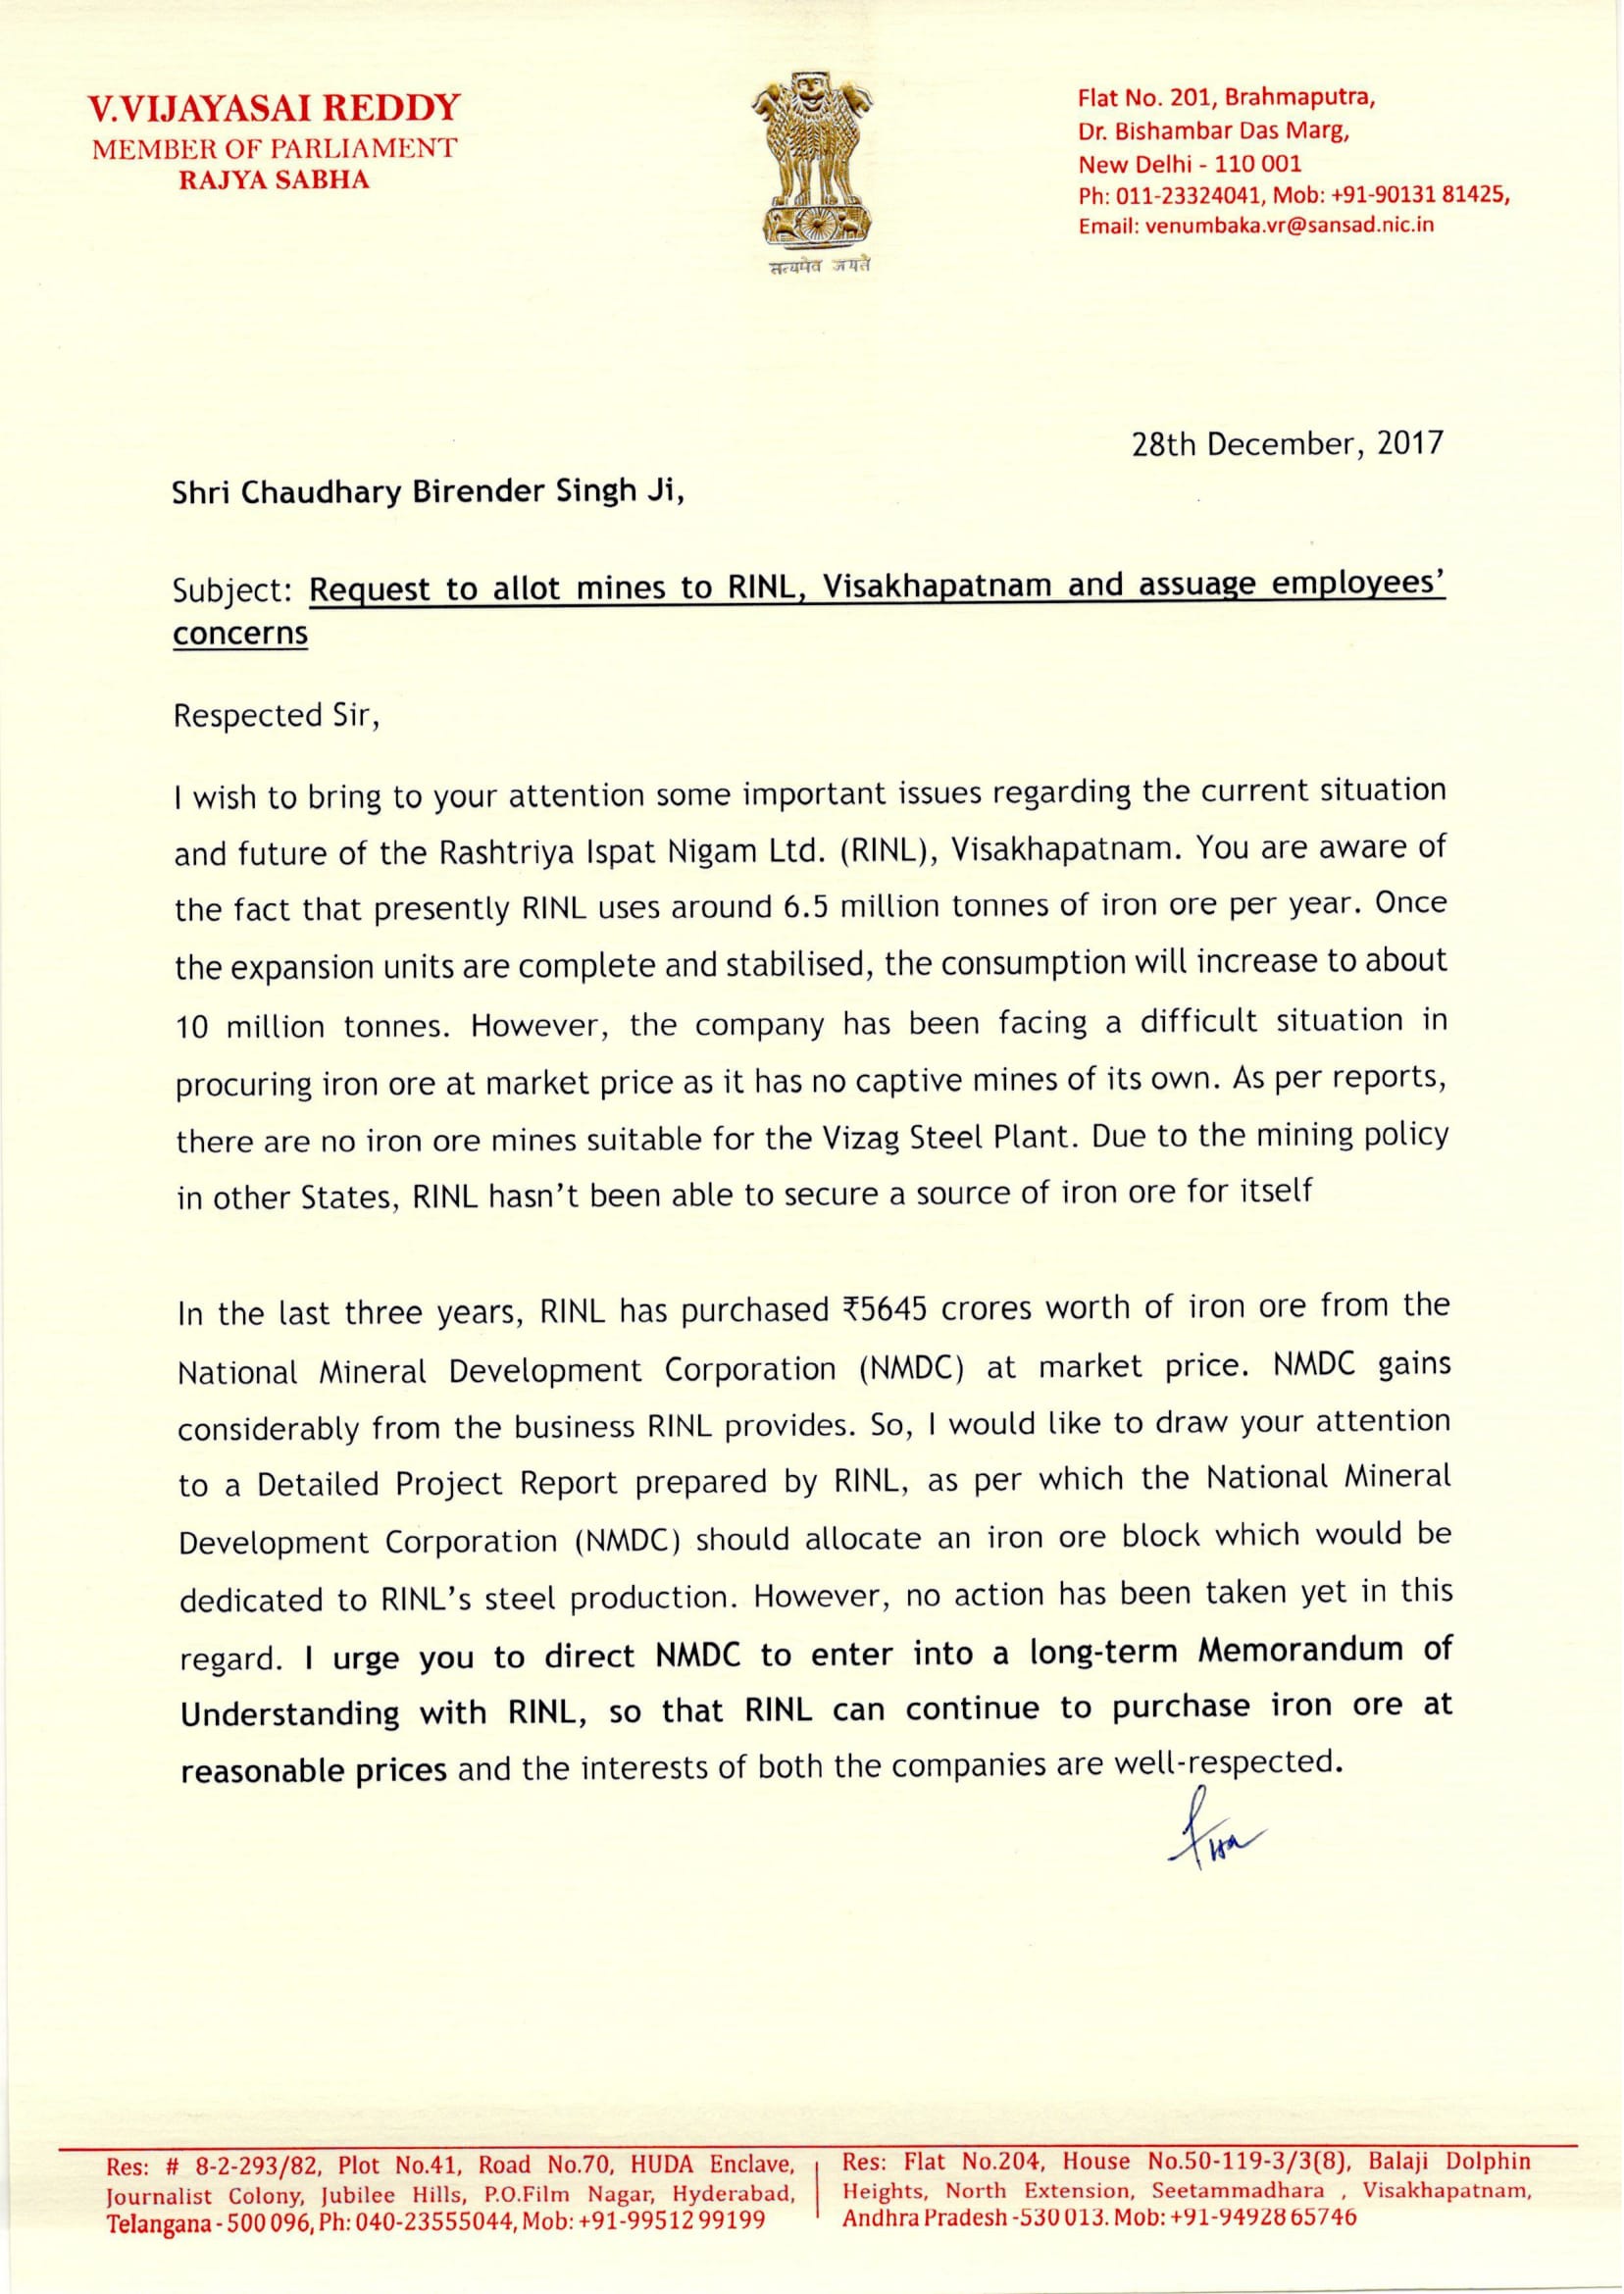 Letter to Chaudary Birender Singh